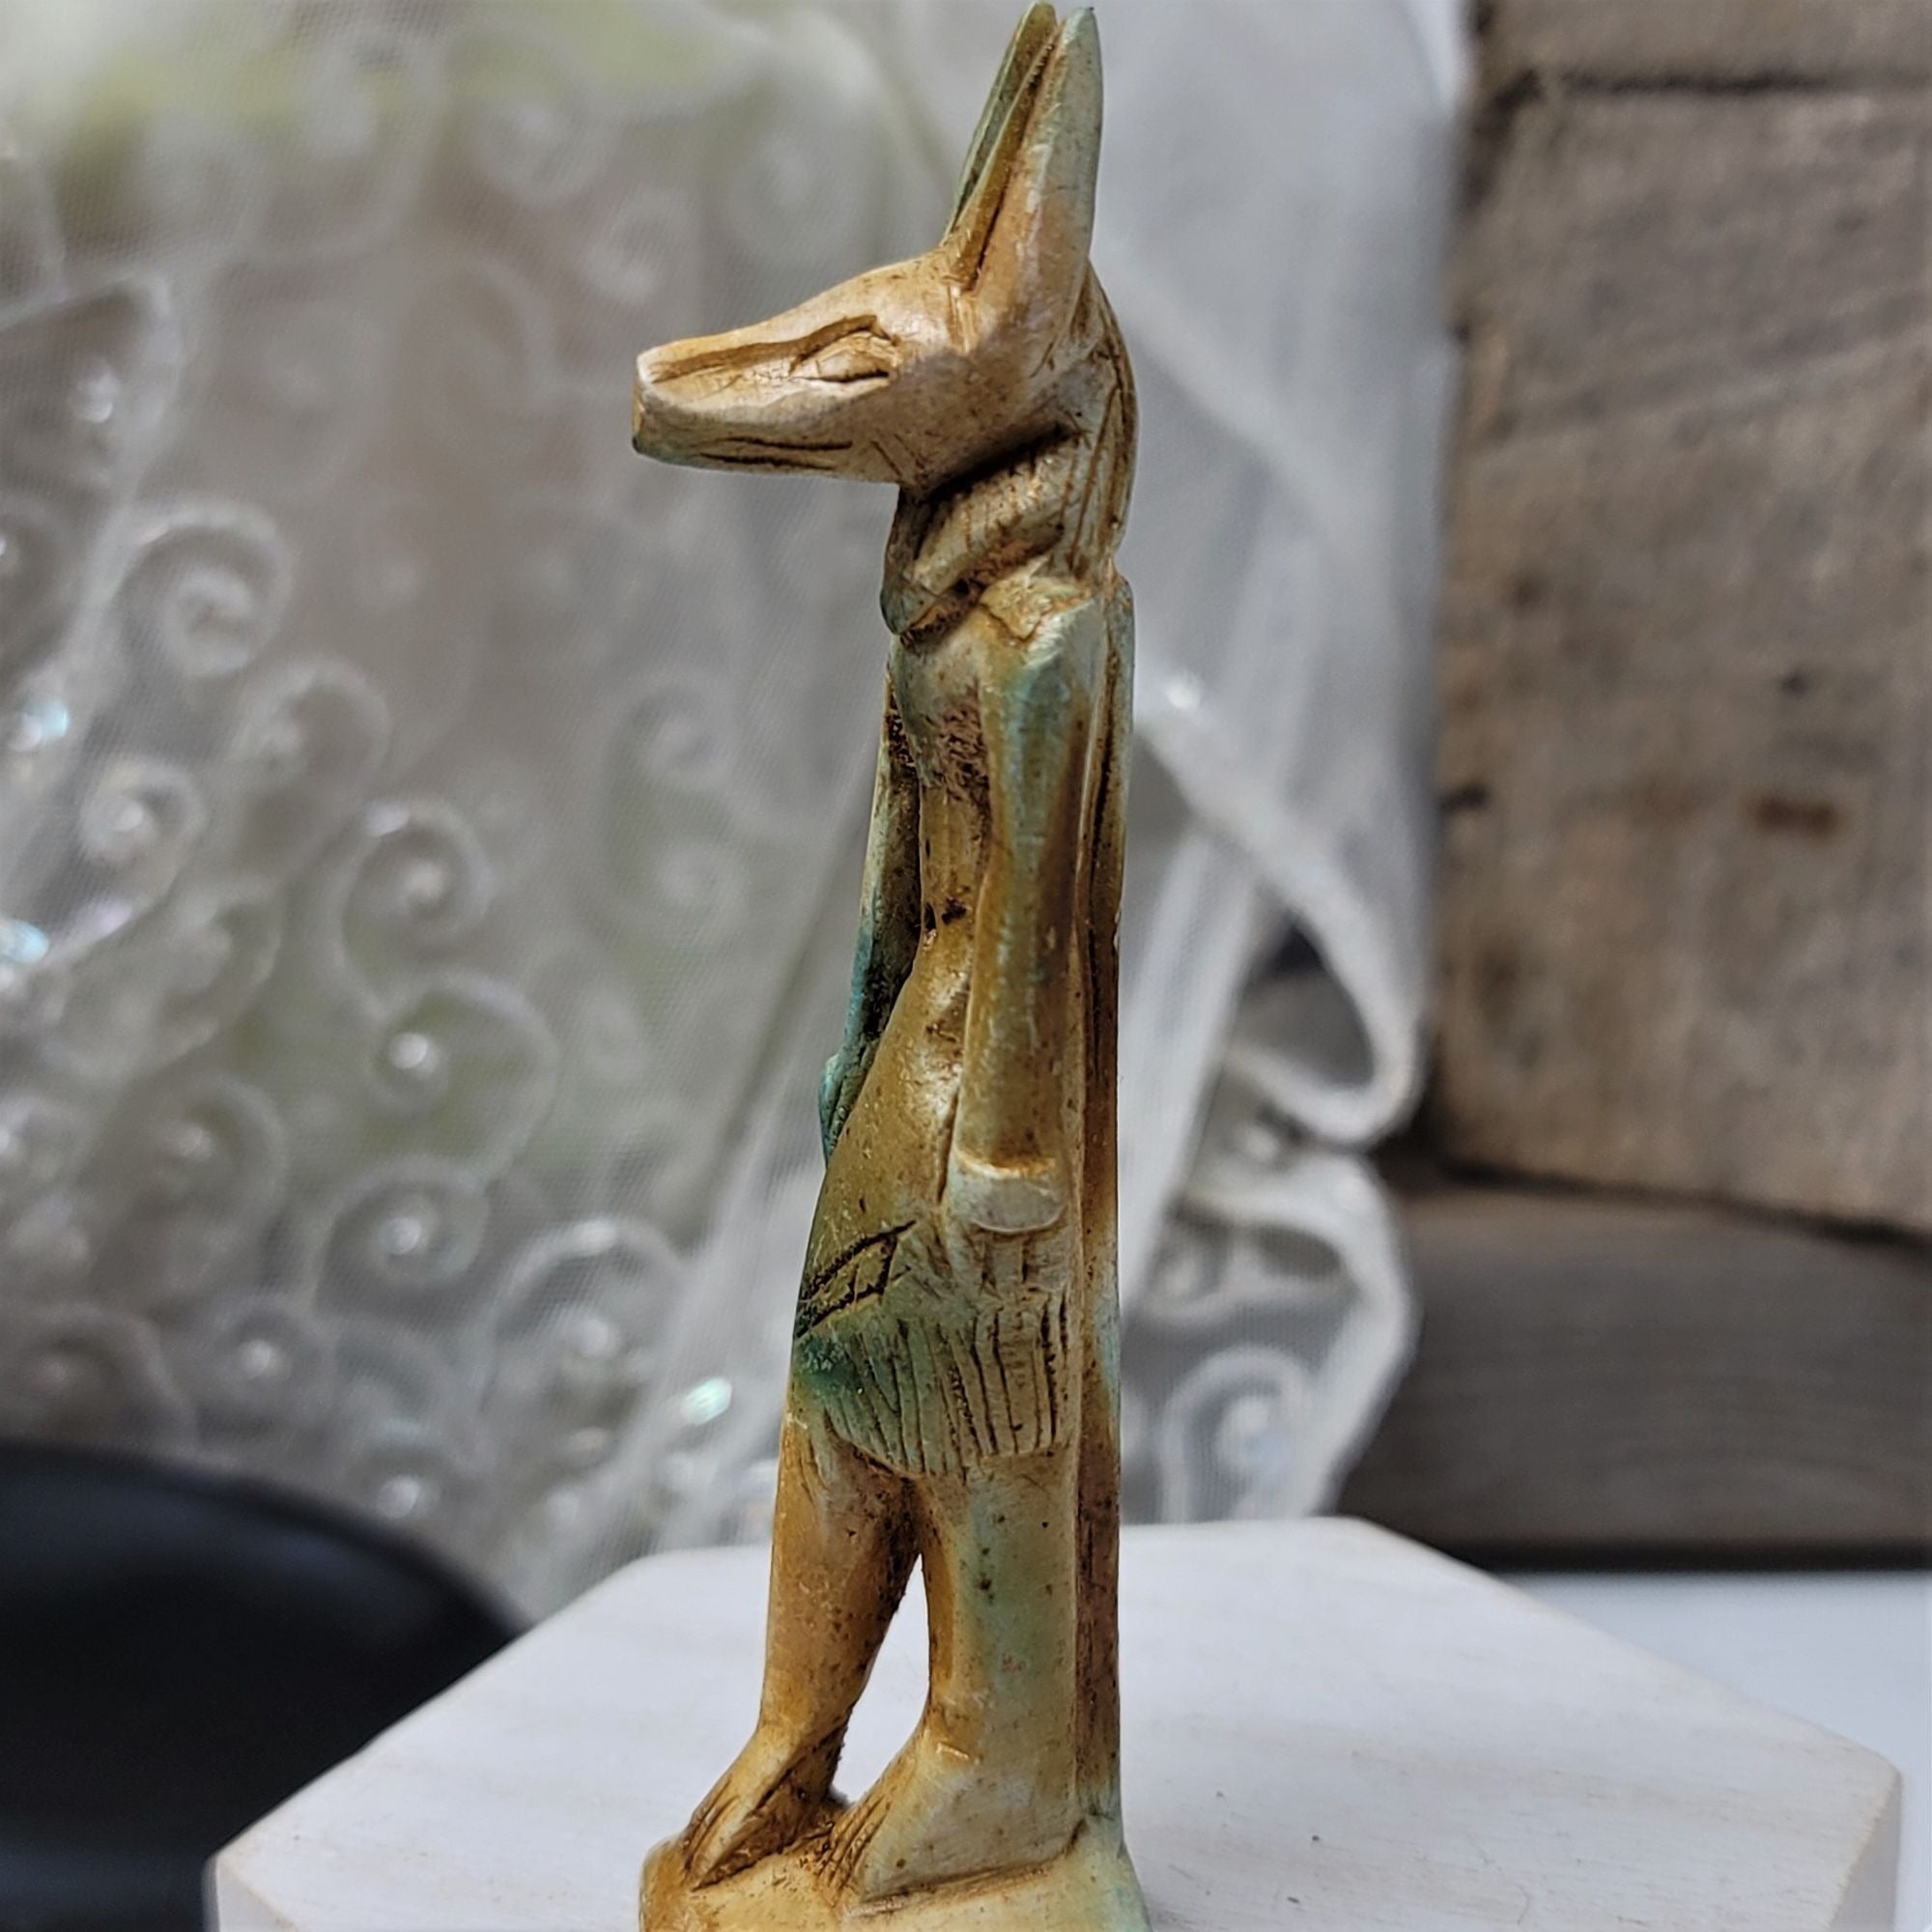 Vintage Ejyptian Statue of Anubis  Figurine 4" by  1"  Clay